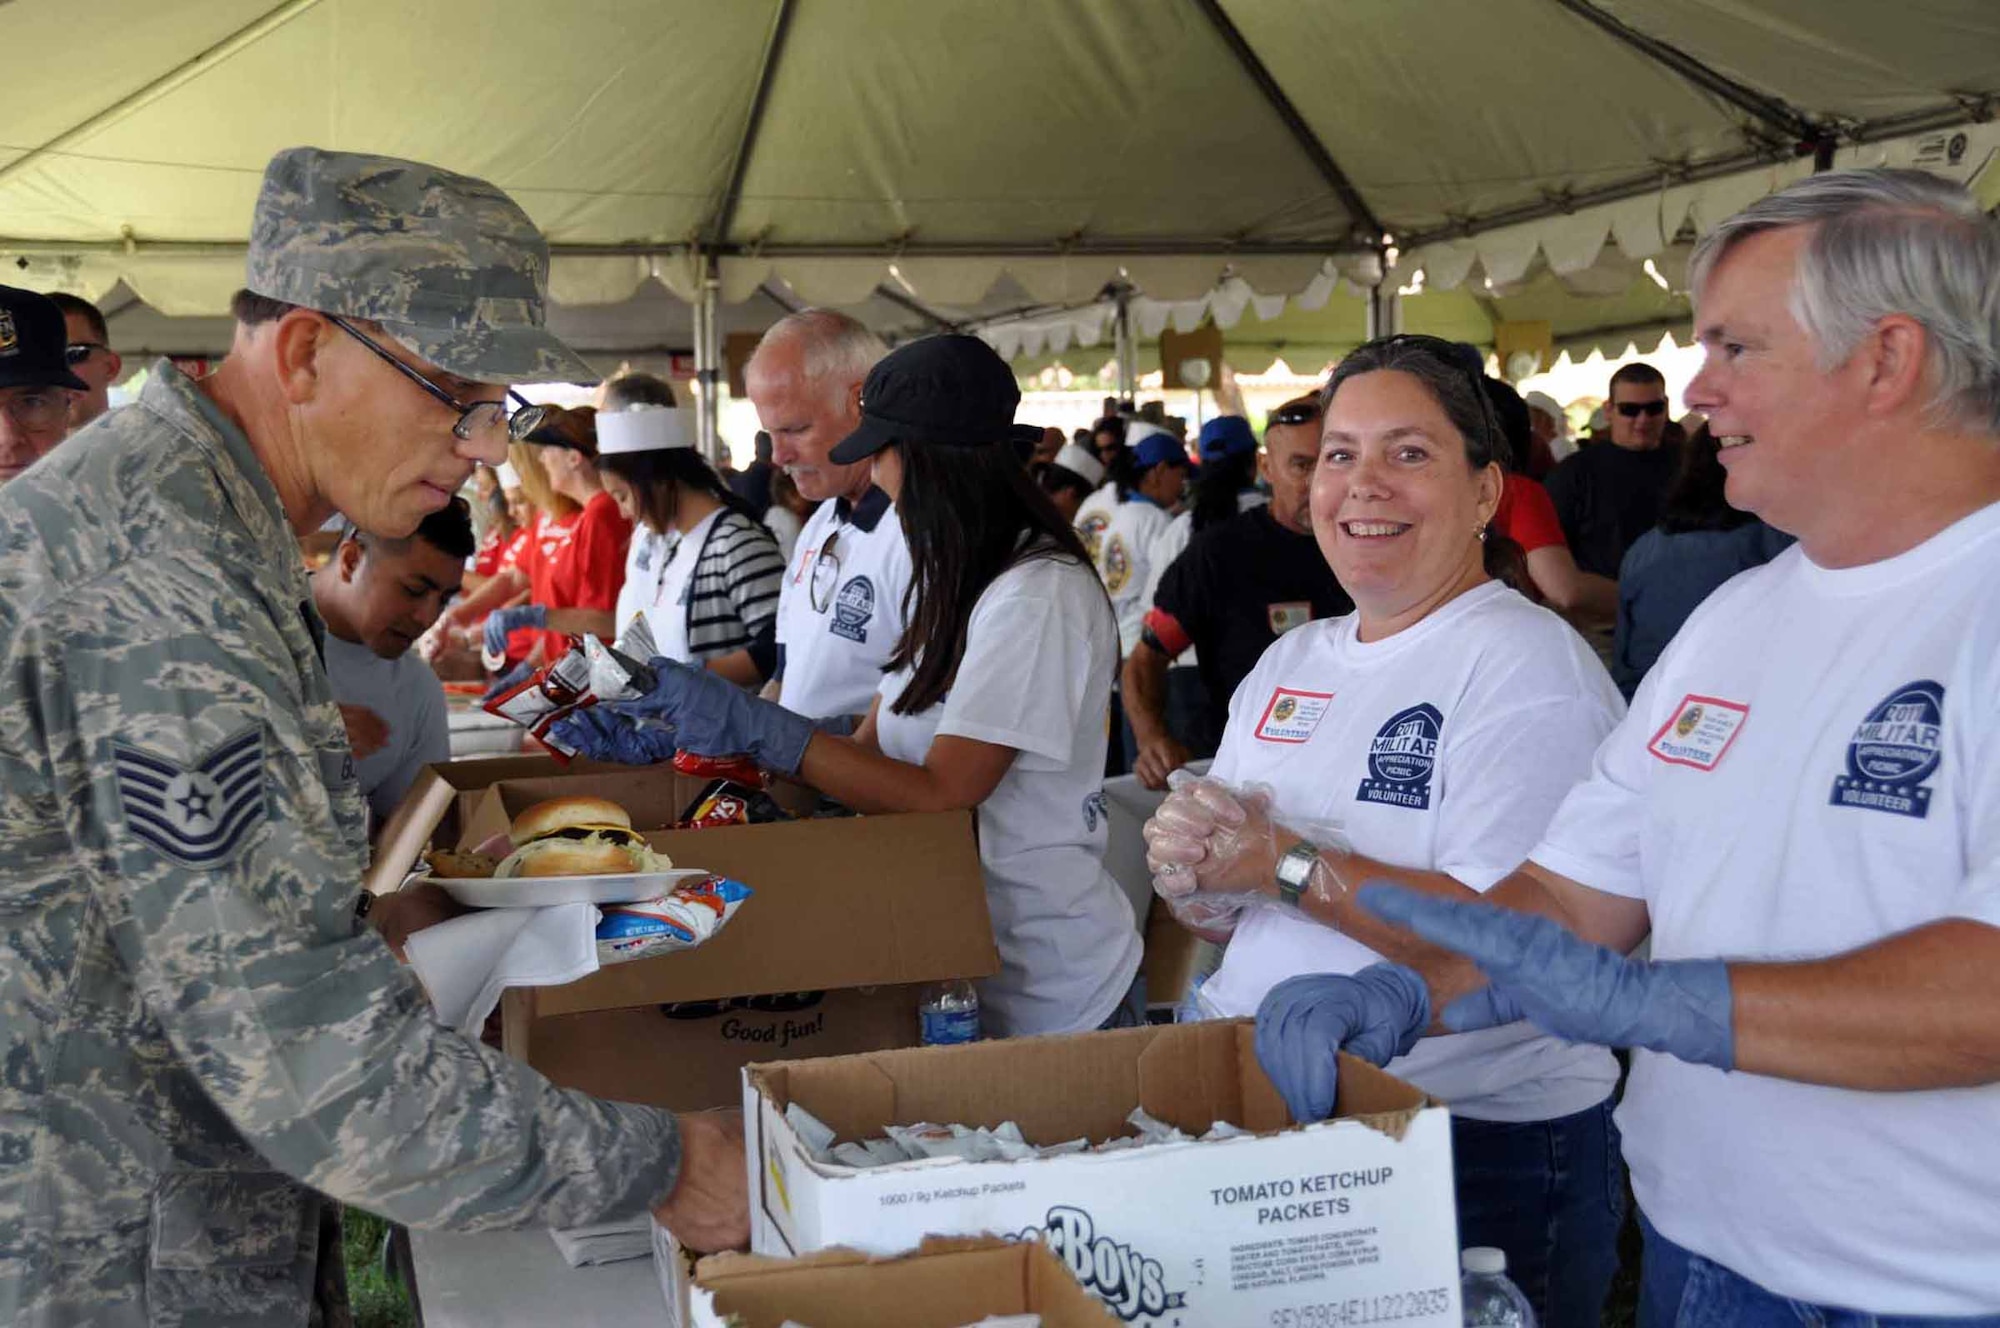 Riverside volunteers Roger and Karen McCoy serve food to Staff Sgt. Gary Glaze, 452nd Civil Engineering Squadron, at the 39th Annual Military Appreciation Picnic at March Air Reserve Base, Calif., Sept. 10, 2011.  The ?picnic is held each year during the combined unit training assembly weekend.  (U.S. Air Force photo/ Master Sgt. Linda Welz)